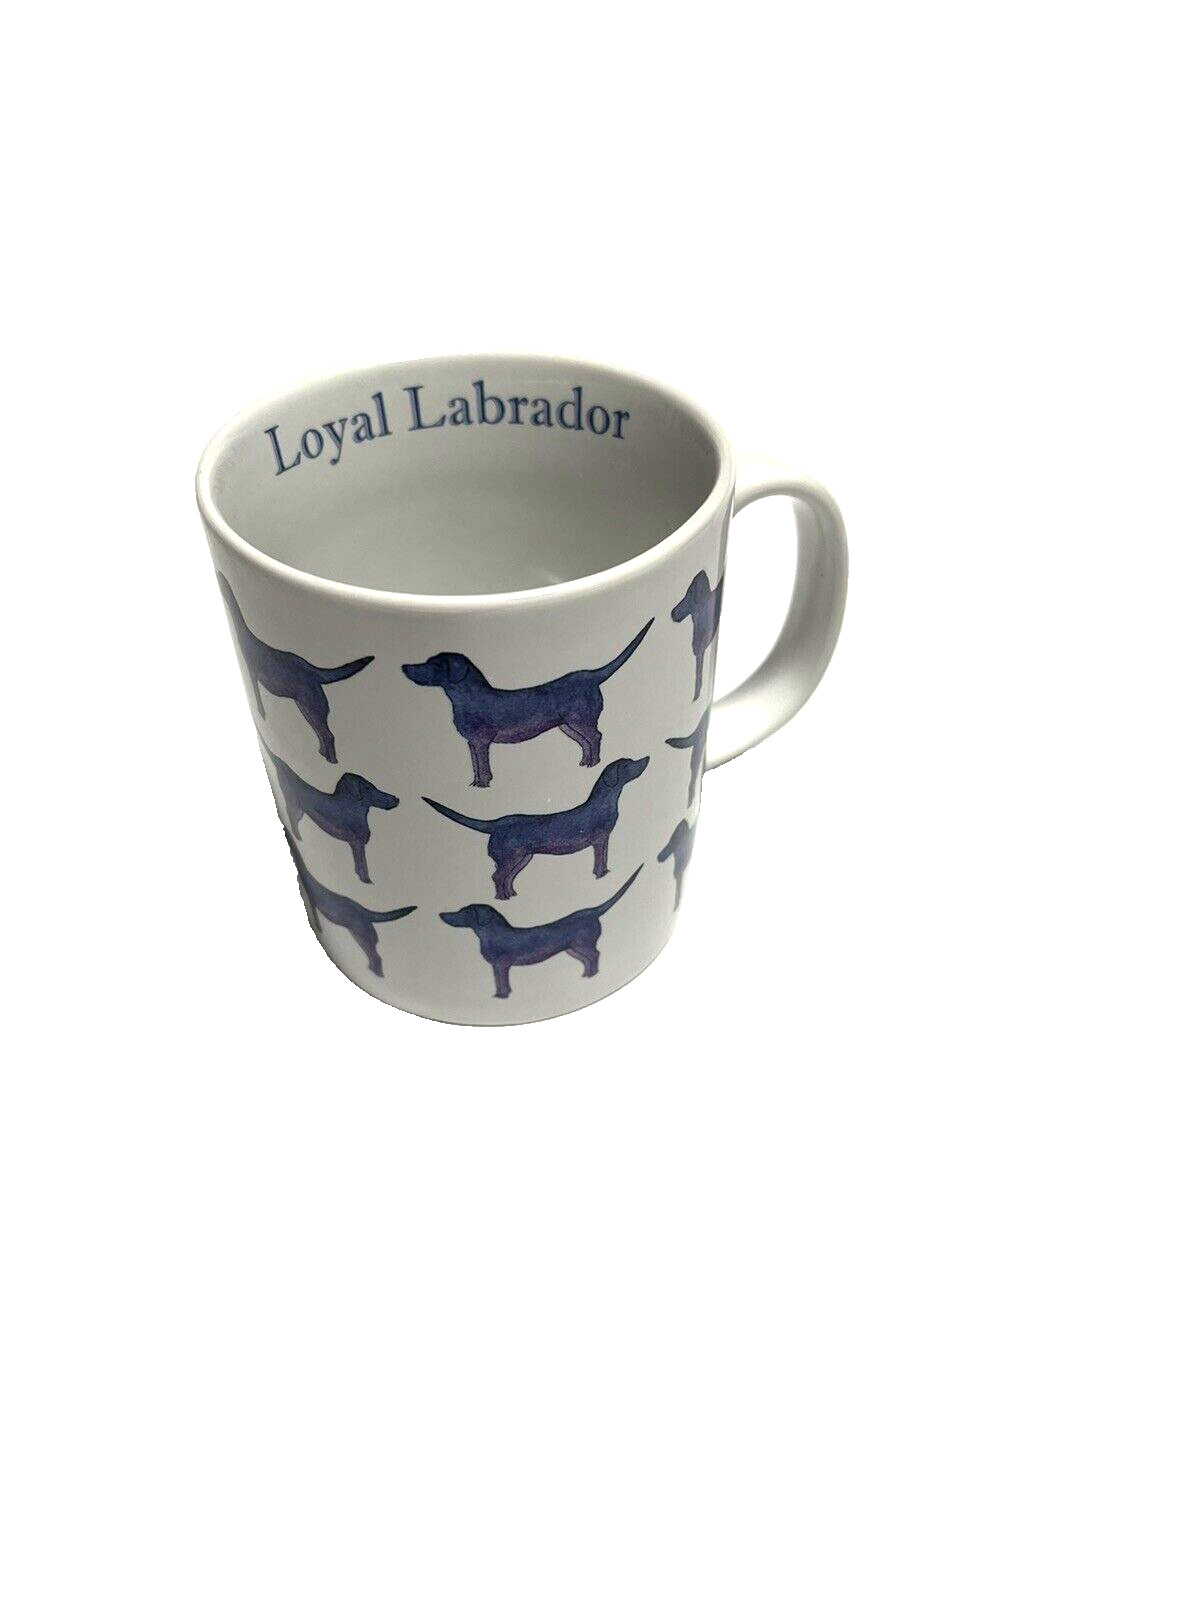 Blue & White Loyal Labrador Cup Designed by Milly Green 3.5 inches Tall